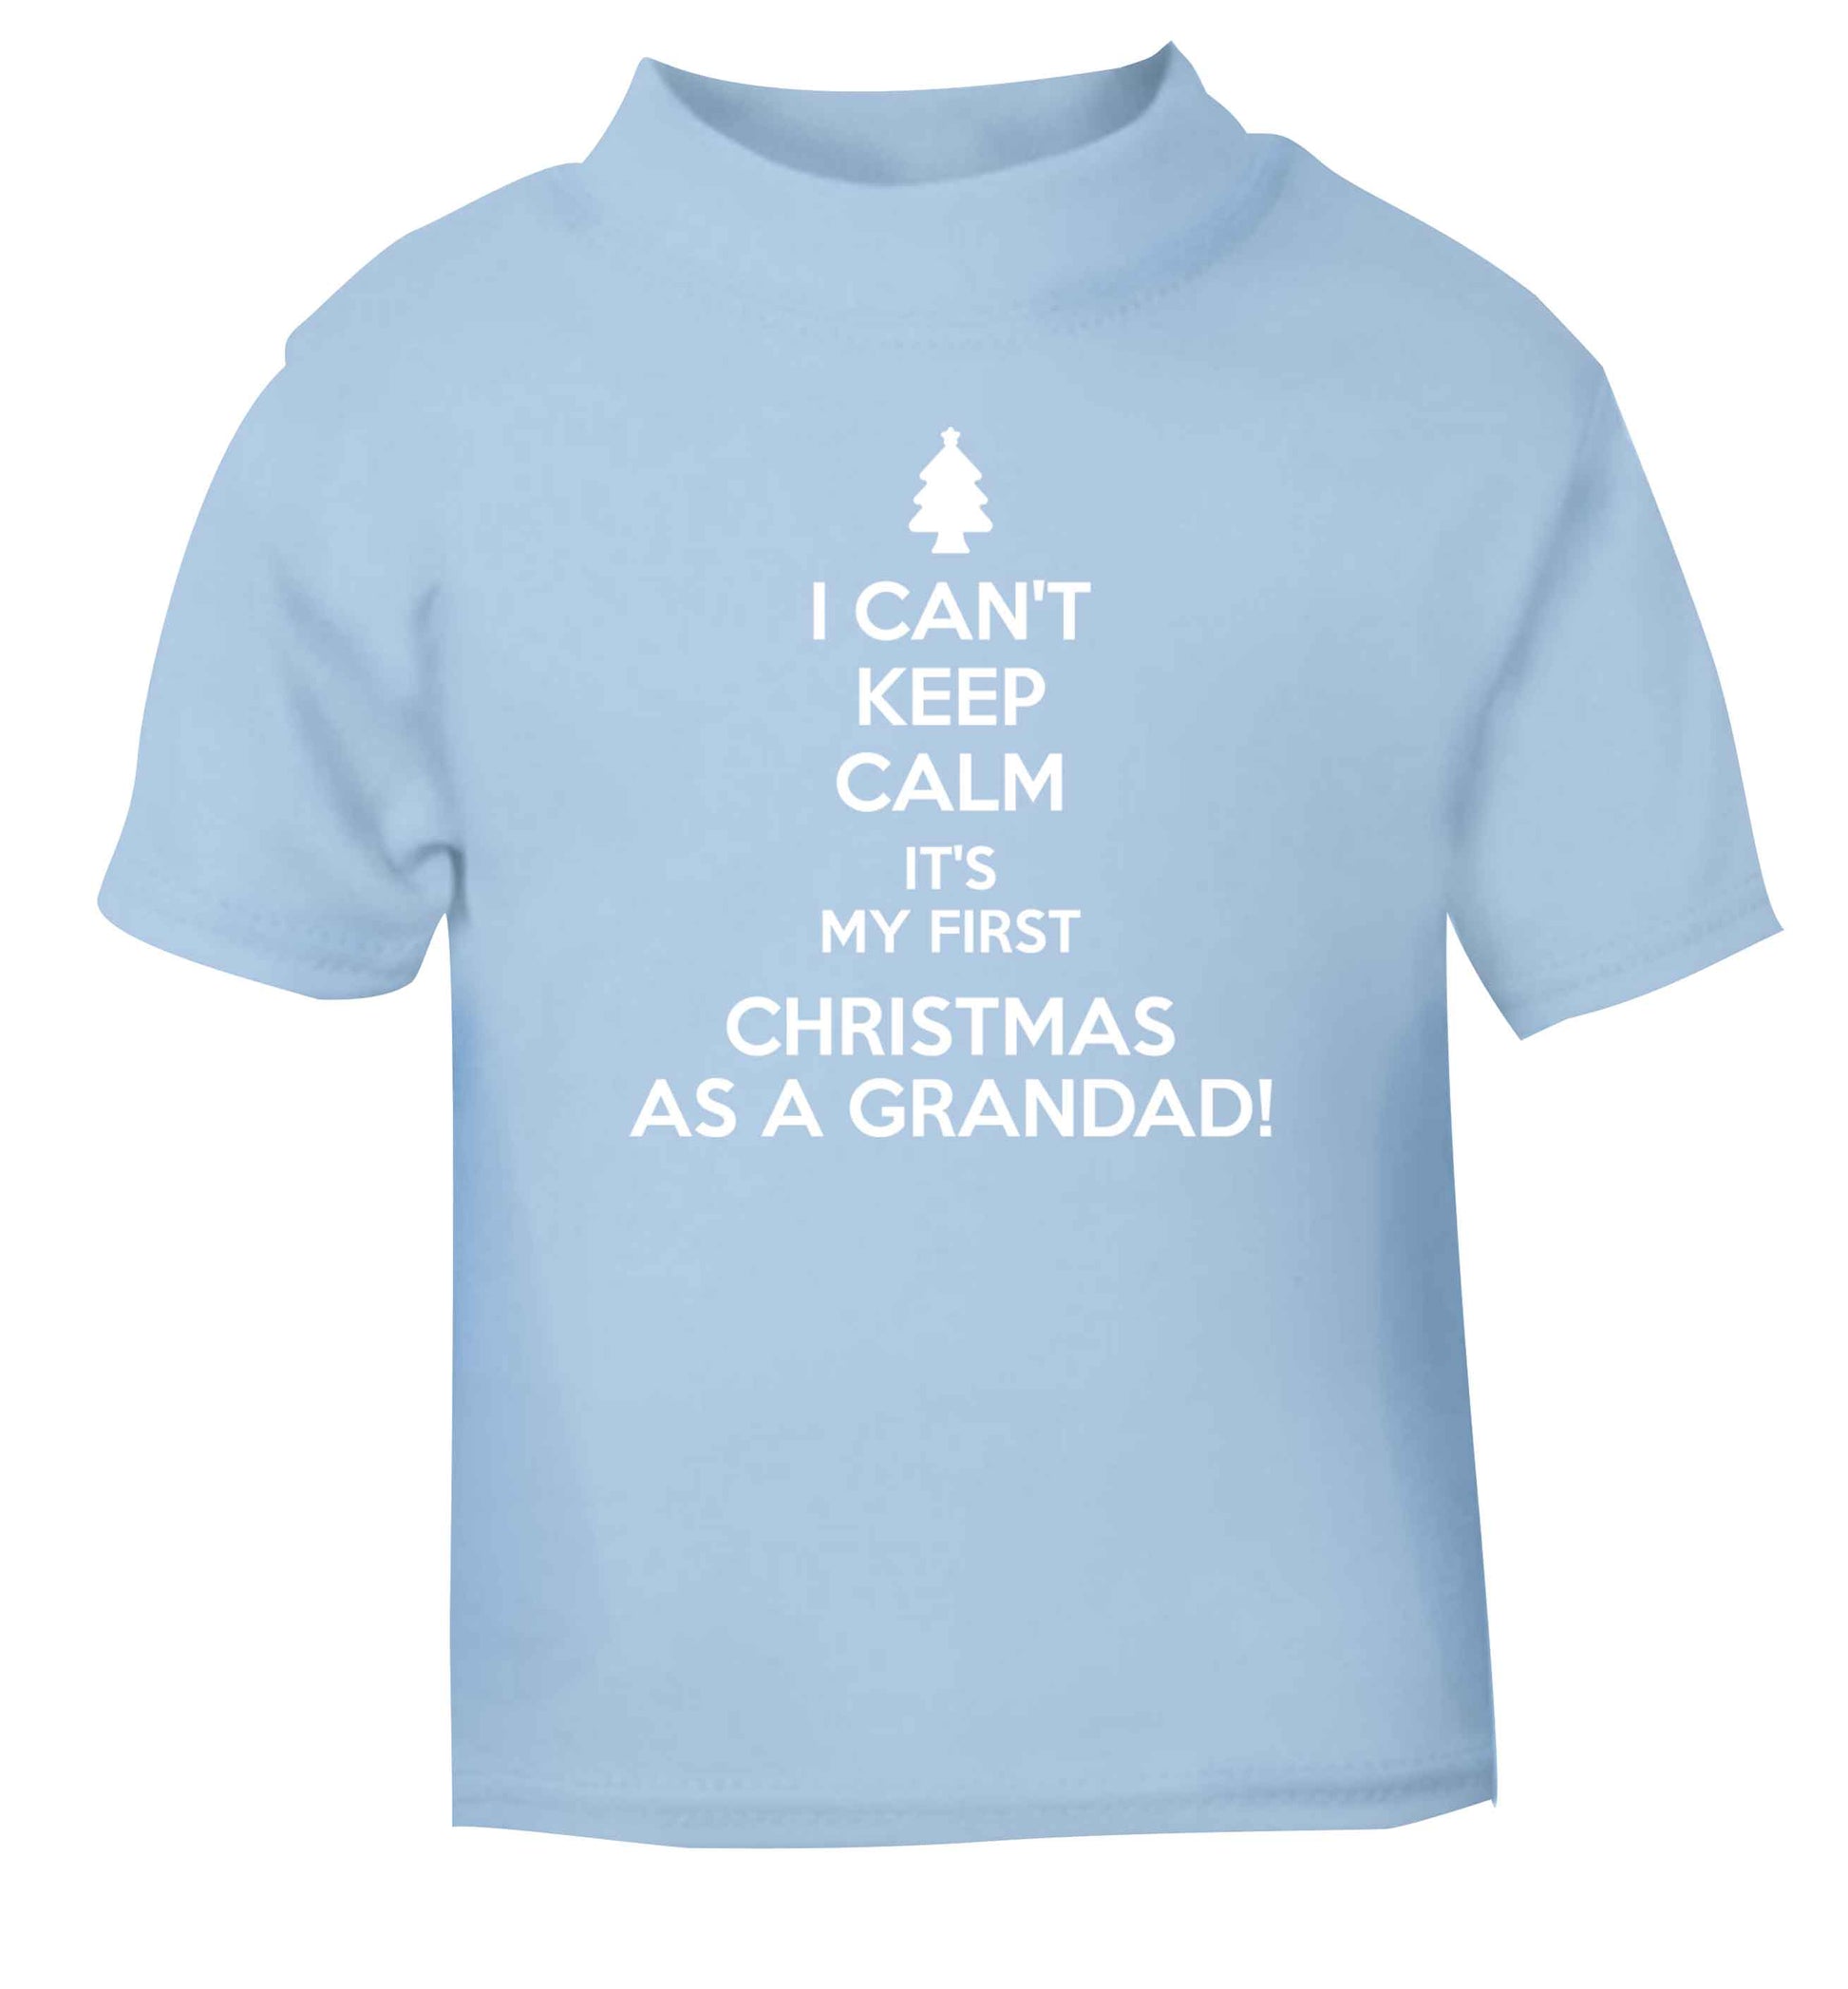 I can't keep calm it's my first Christmas as a grandad! light blue Baby Toddler Tshirt 2 Years